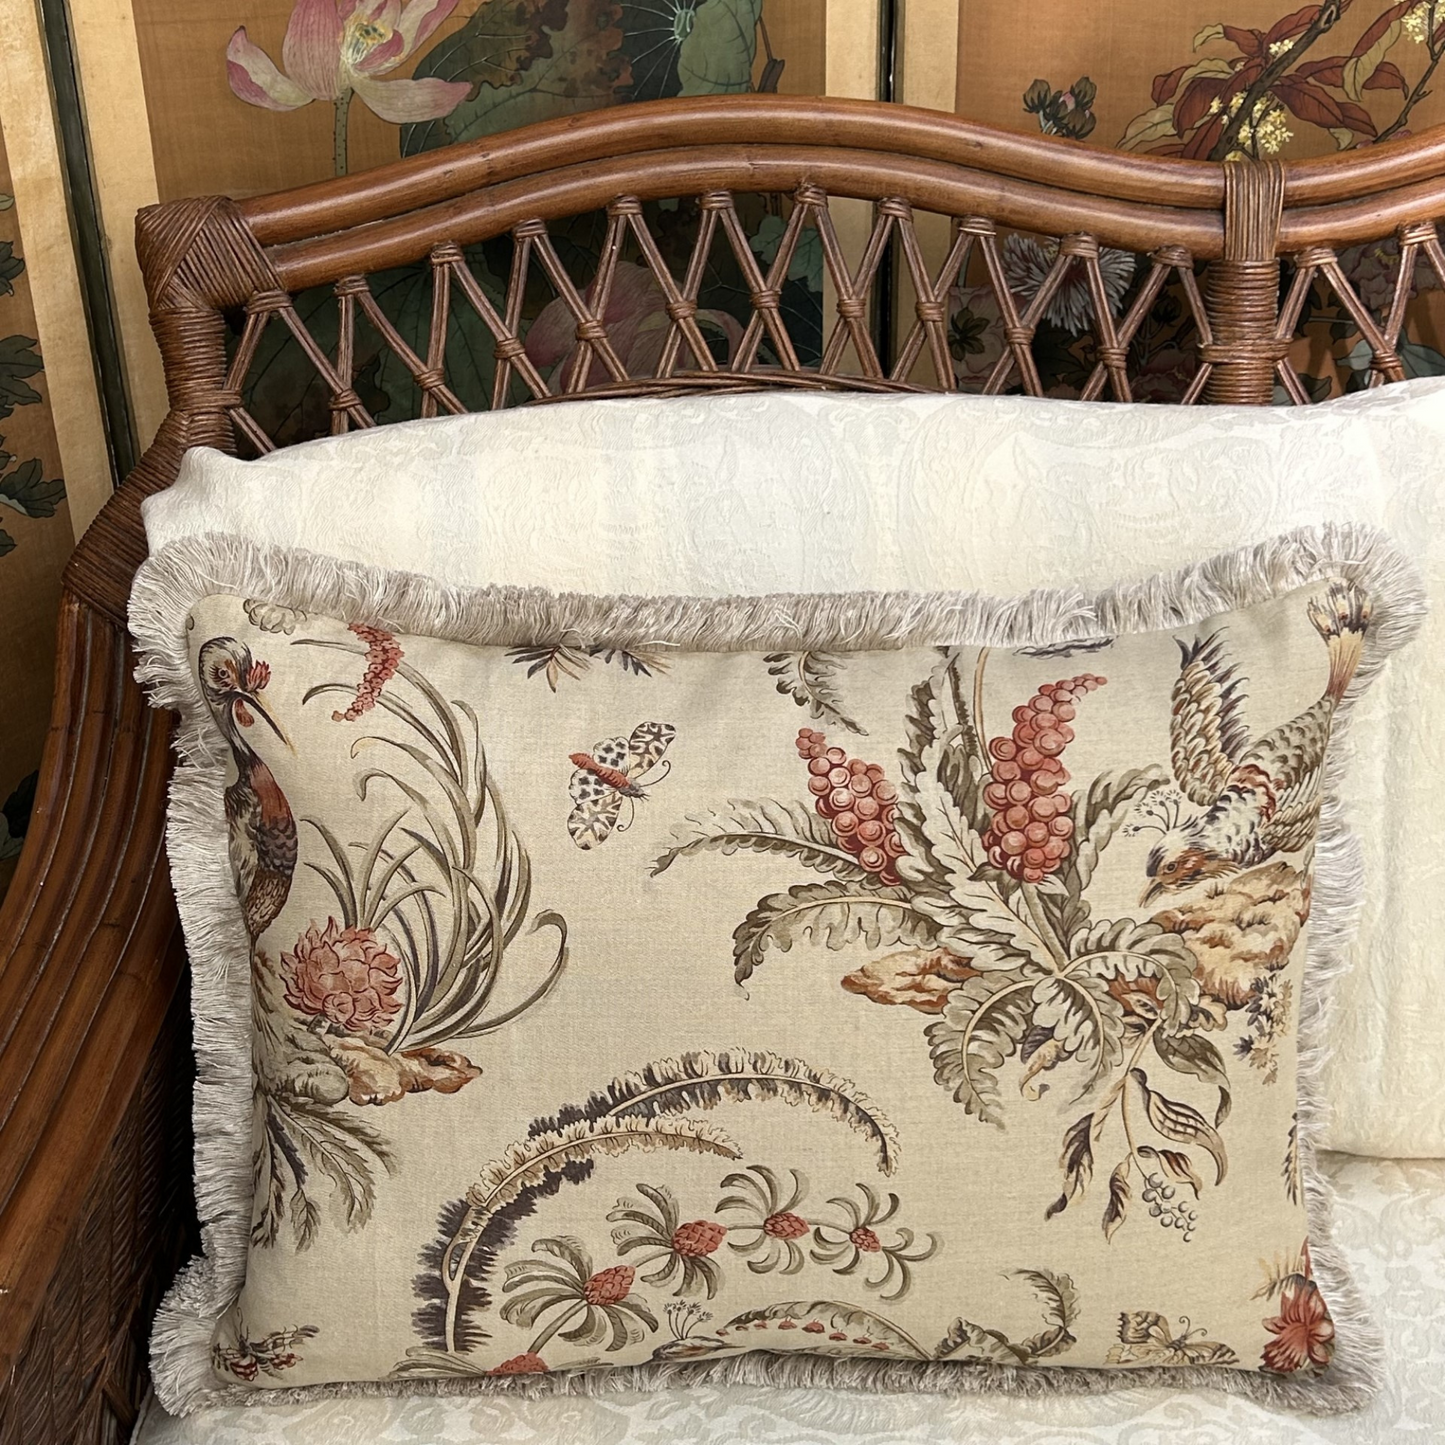 Autumn Woods Vervain Pajaro 18 x 24 Decorative throw Pillow with Down/Feather Insert